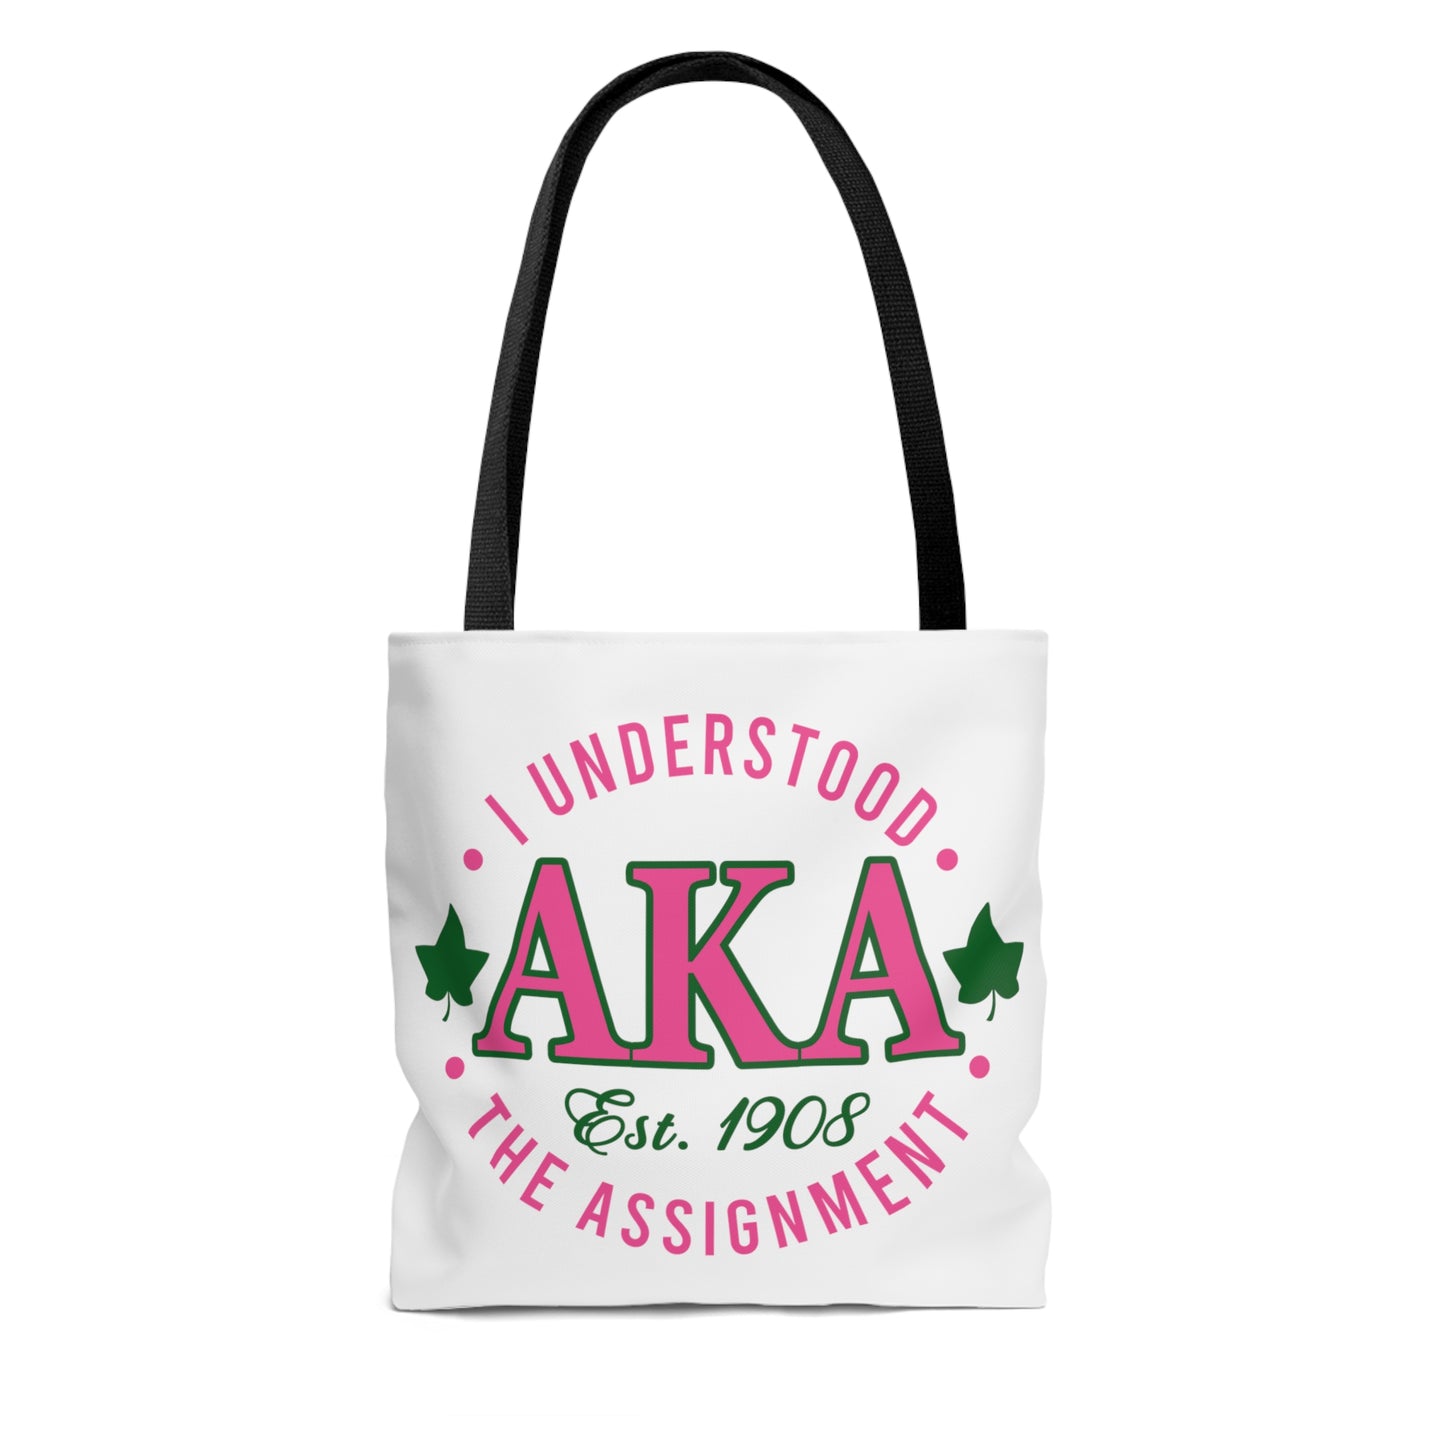 AKA Understood the Assignment Tote Bag